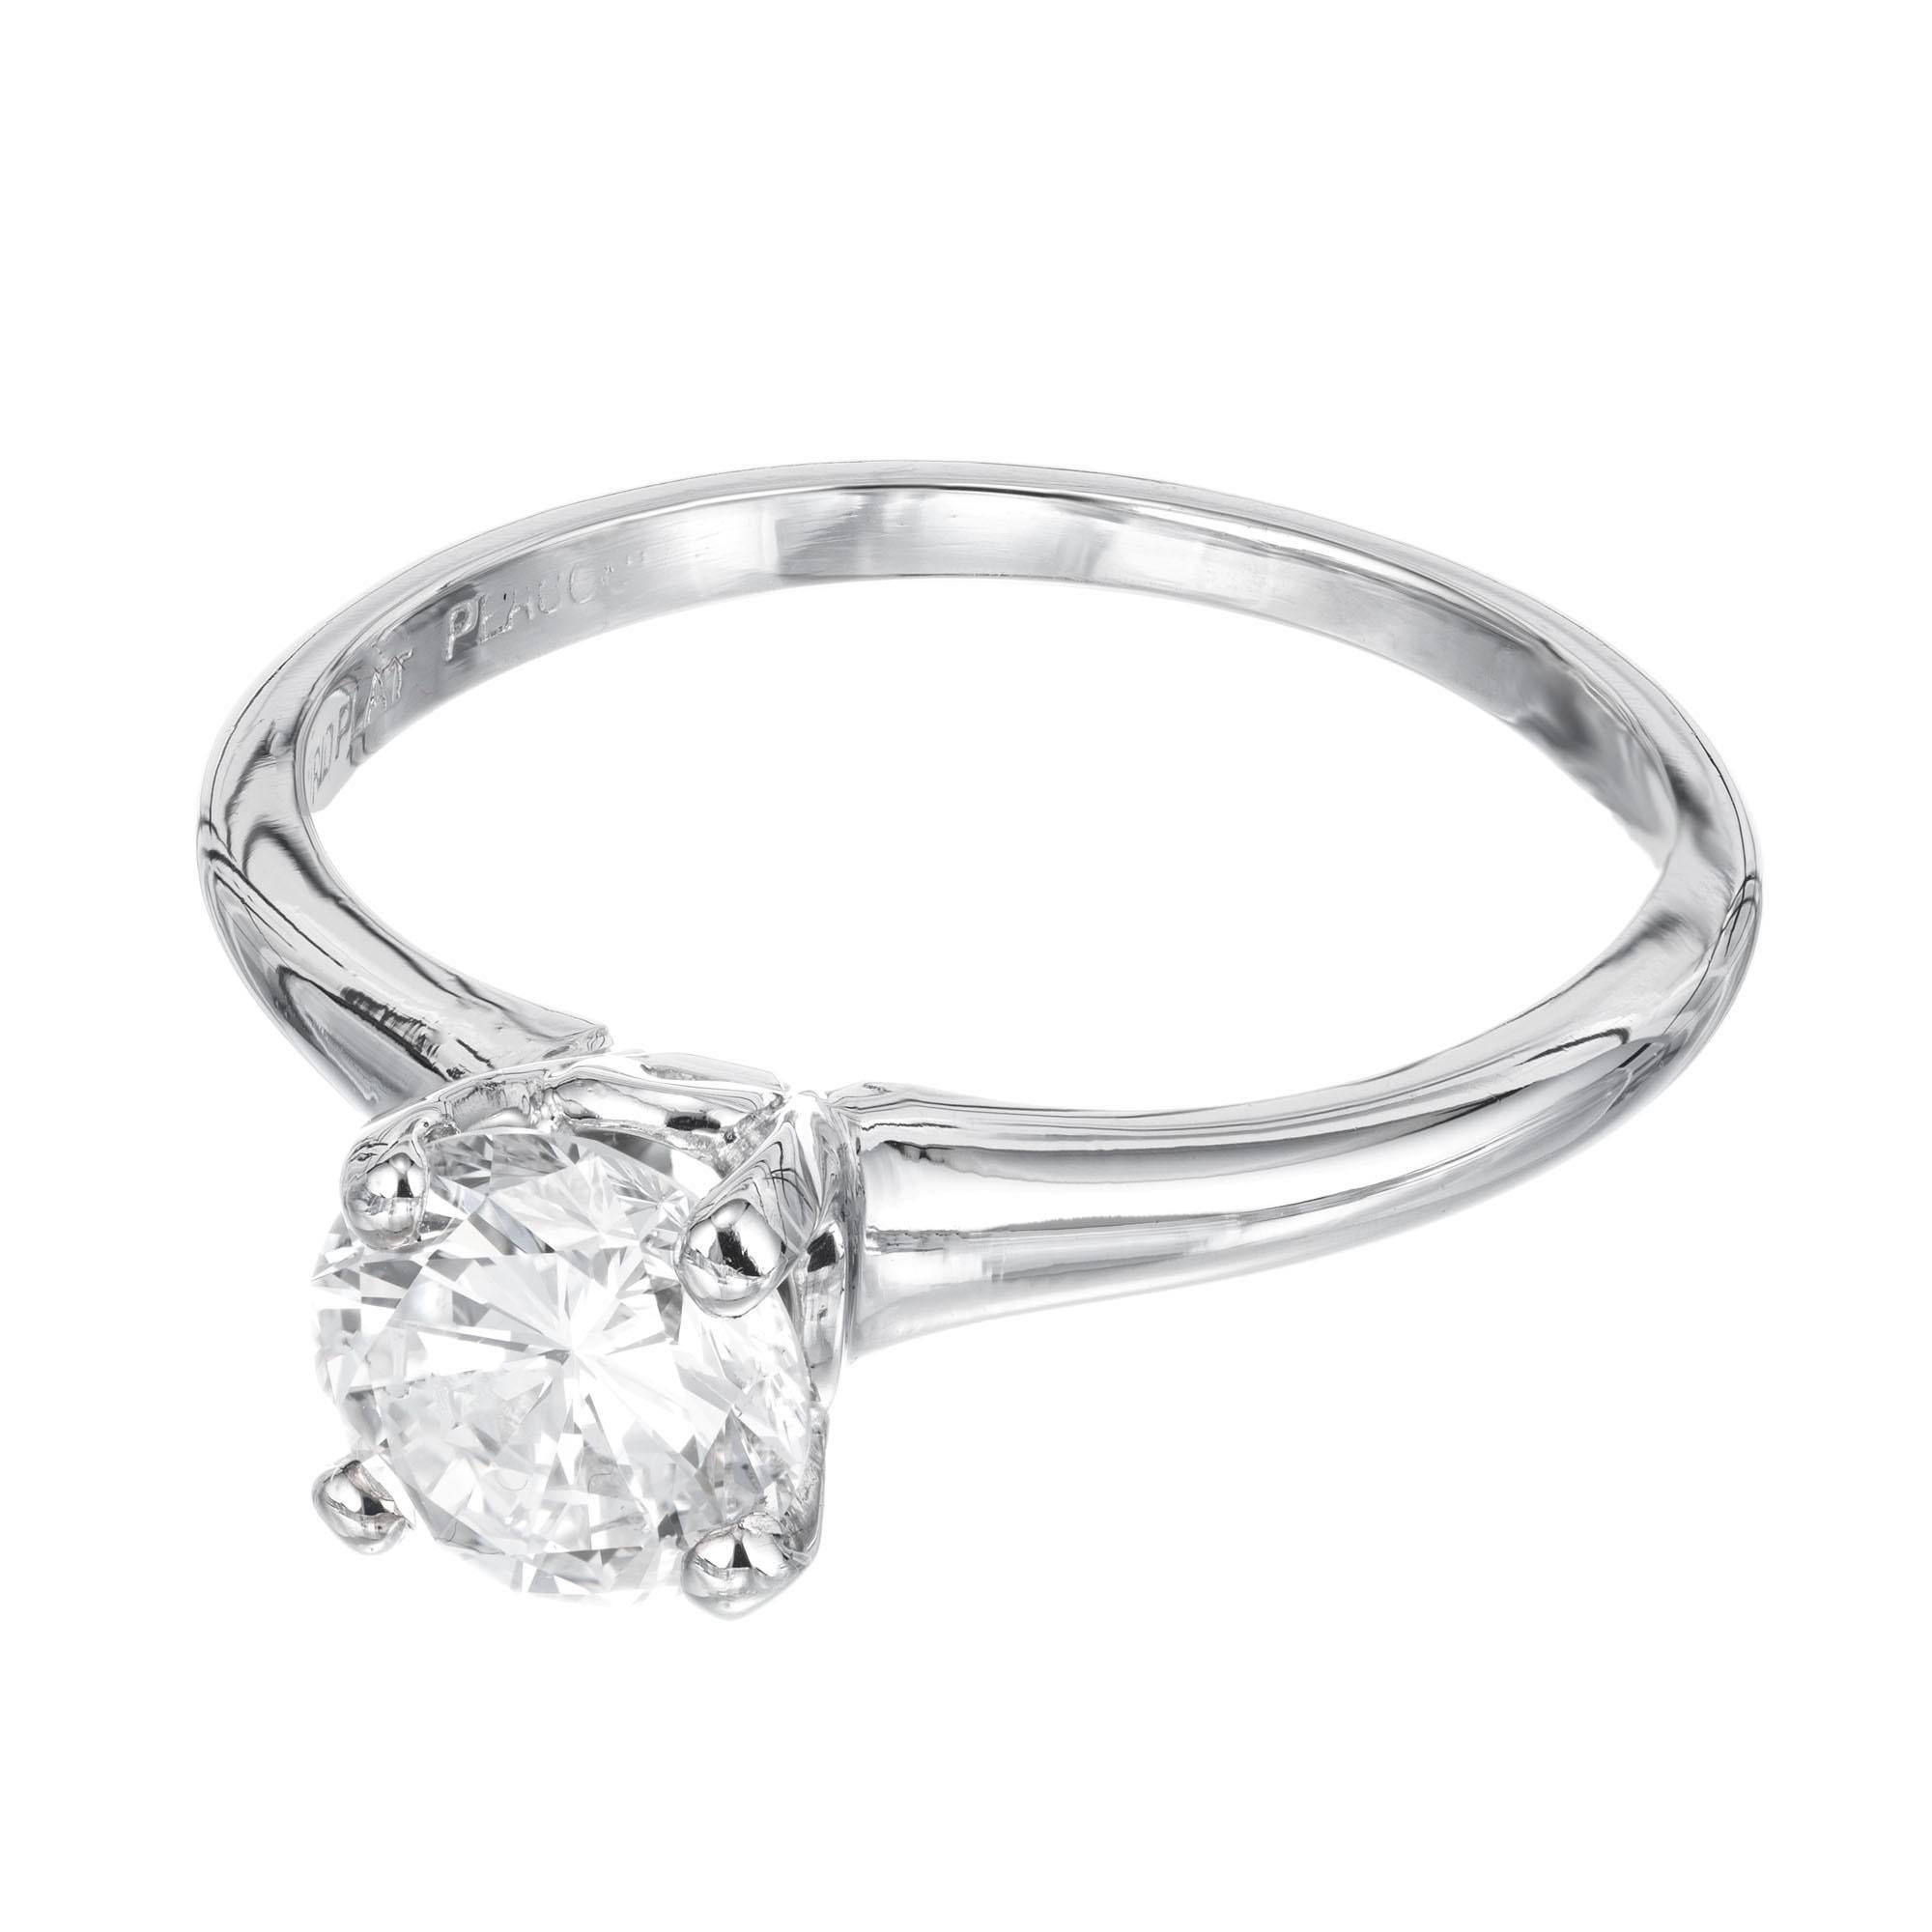 Round Cut GIA Certified .91 Carat Diamond Solitaire Engagement Ring